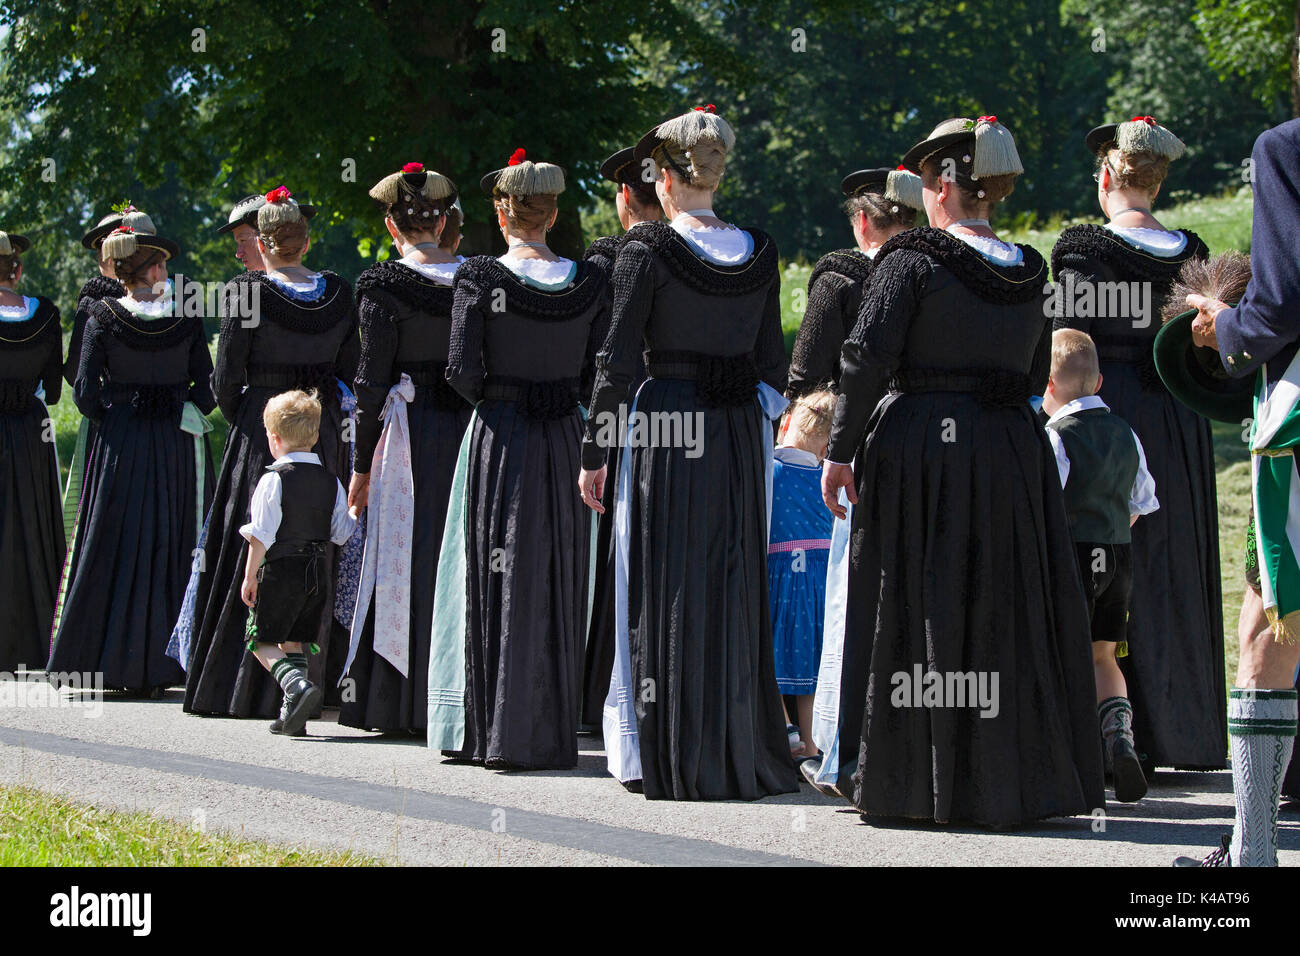 Women In Traditional Costume At A Procession In Upper Bavaria Stock Photo